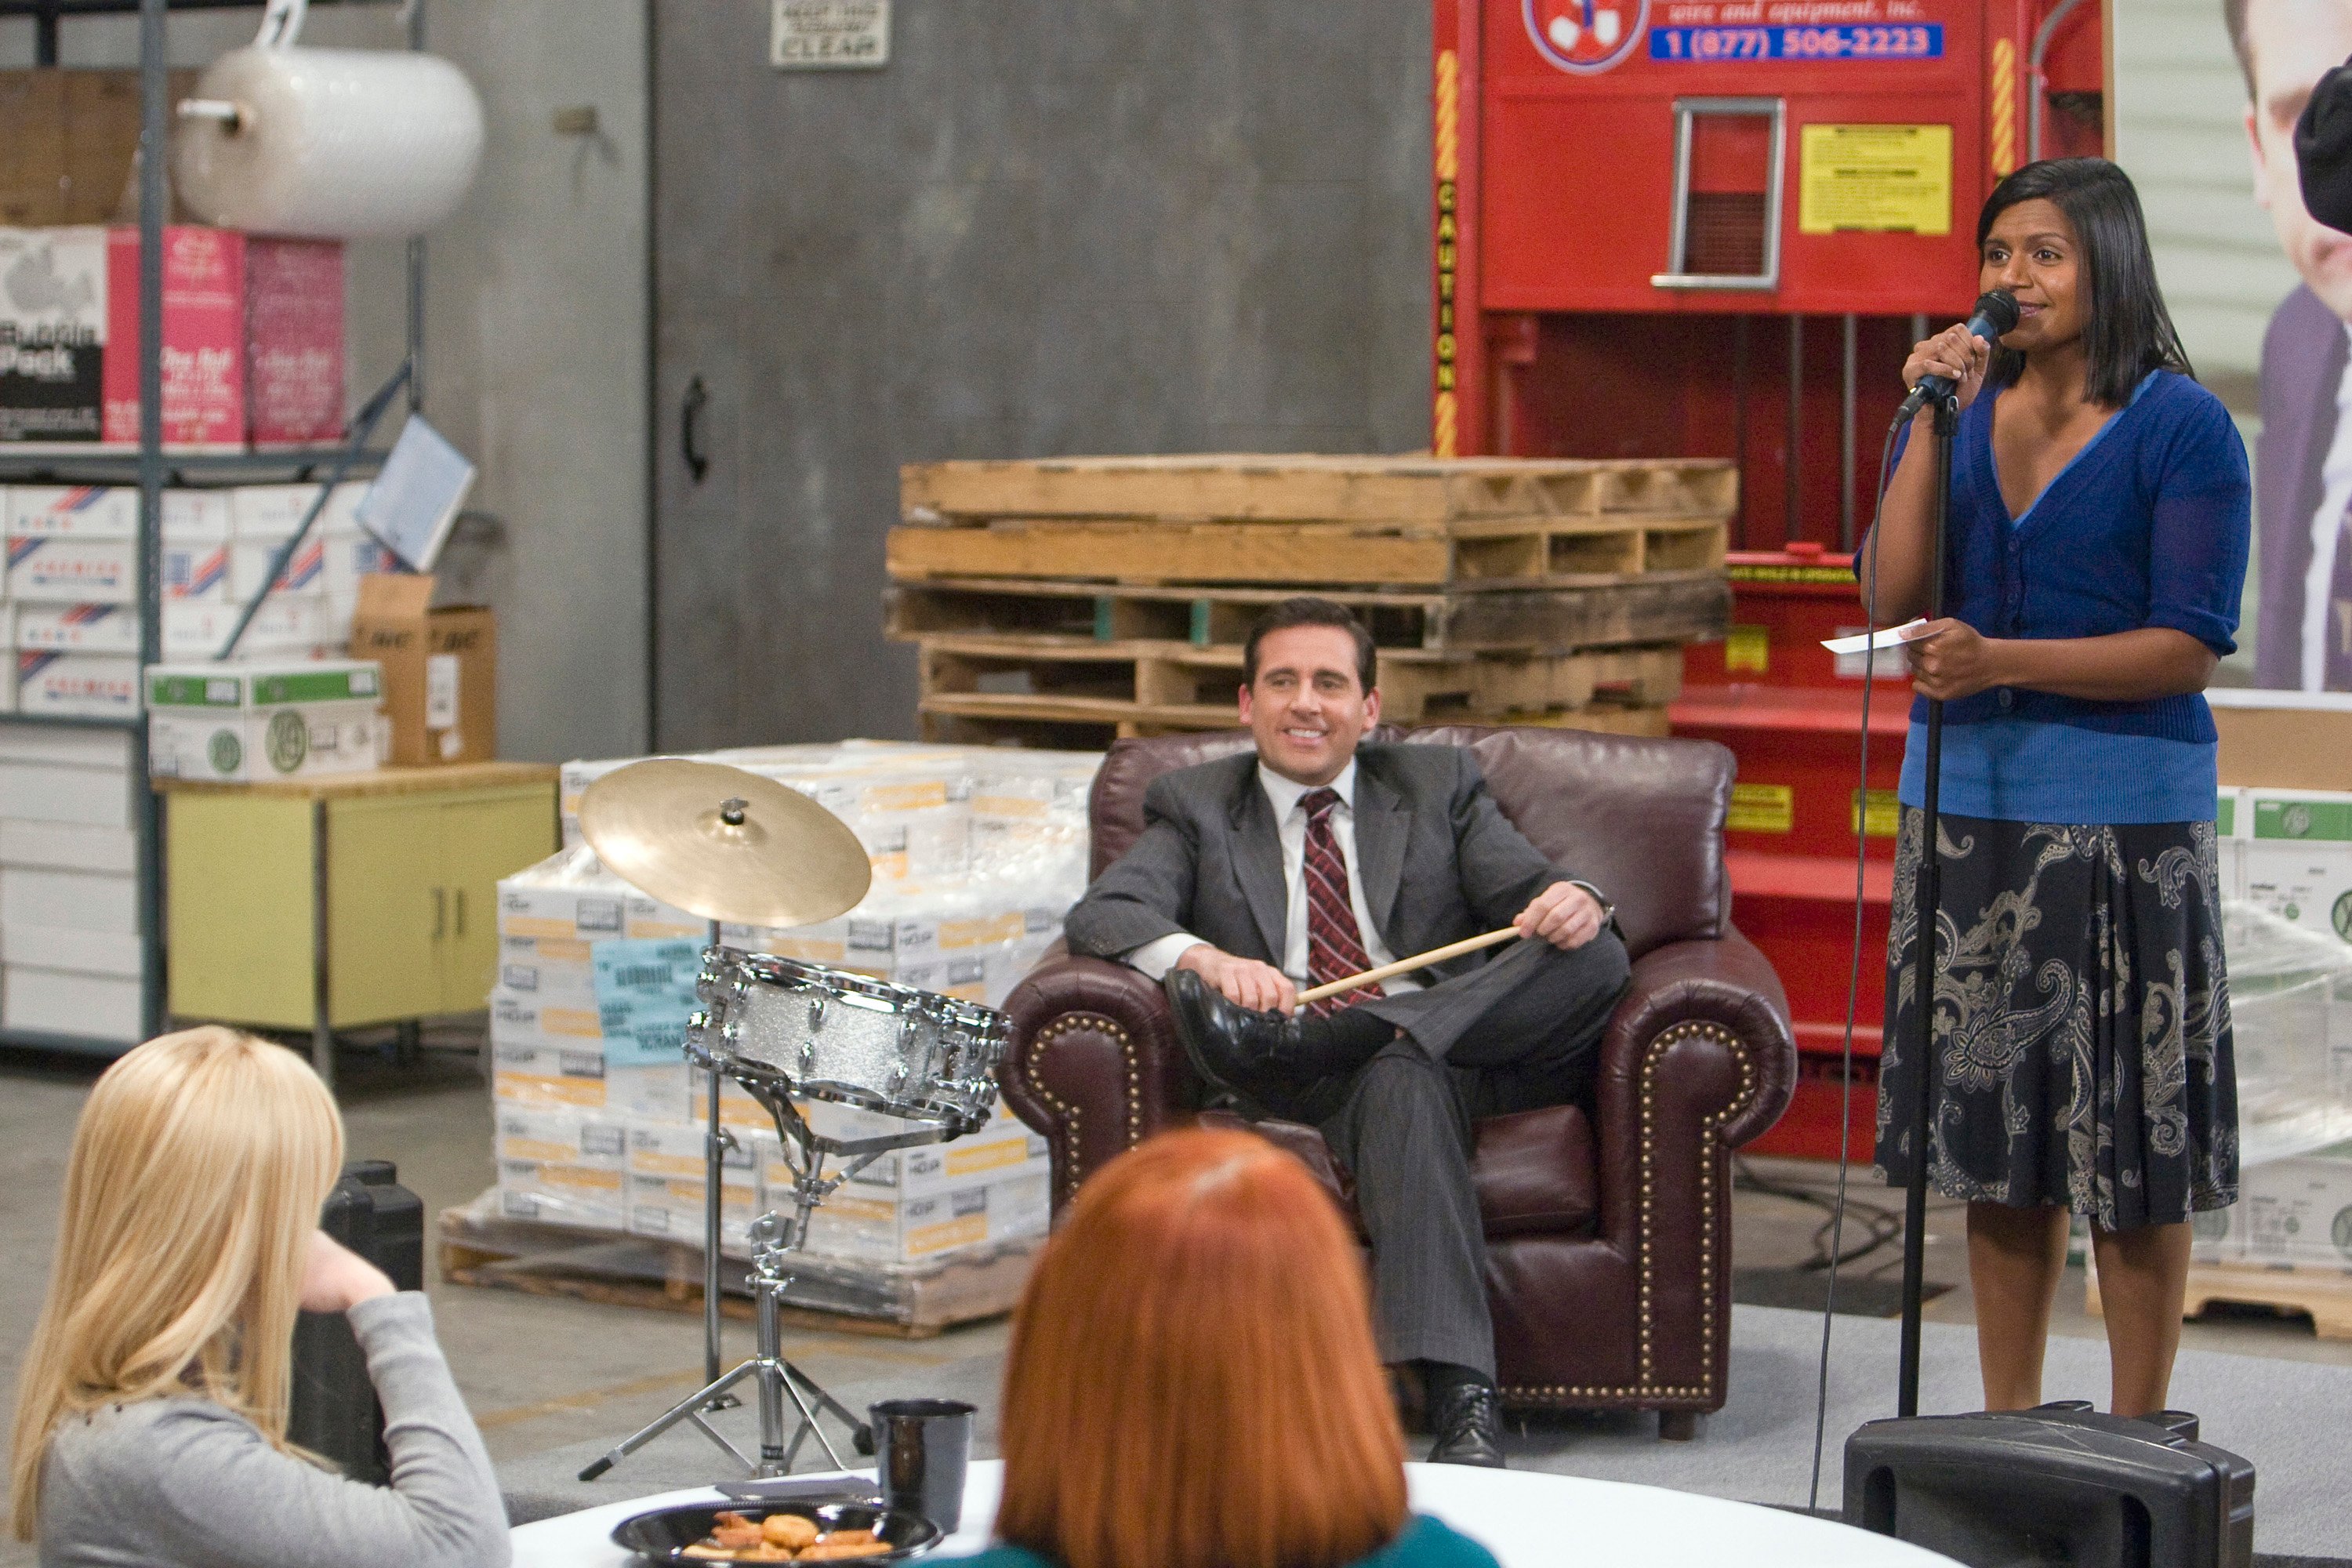 Steve Carell as Michael Scott and Mindy Kaling as Kelly Kapoor in a scene from 'The Office' 